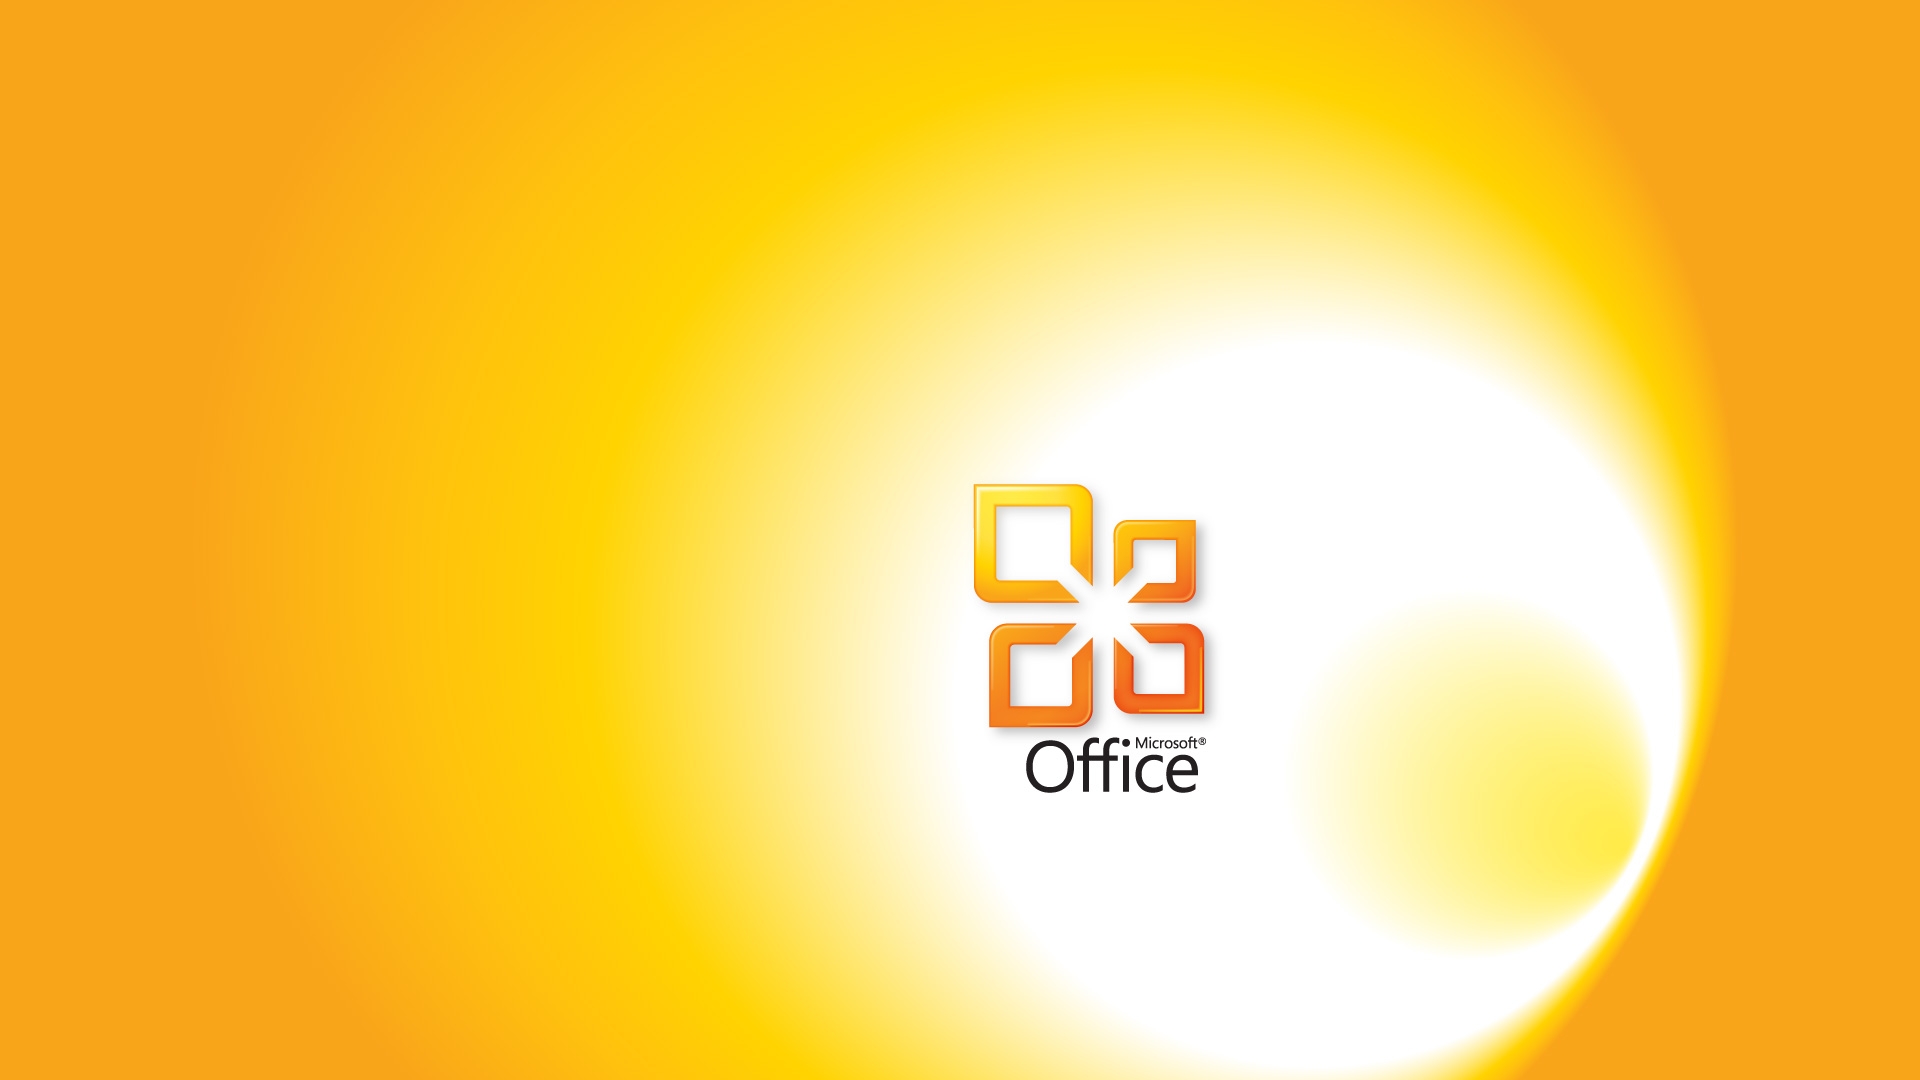 microsoft, office, yellow Wallpaper, HD Hi-Tech 4K Wallpapers, Images,  Photos and Background - Wallpapers Den